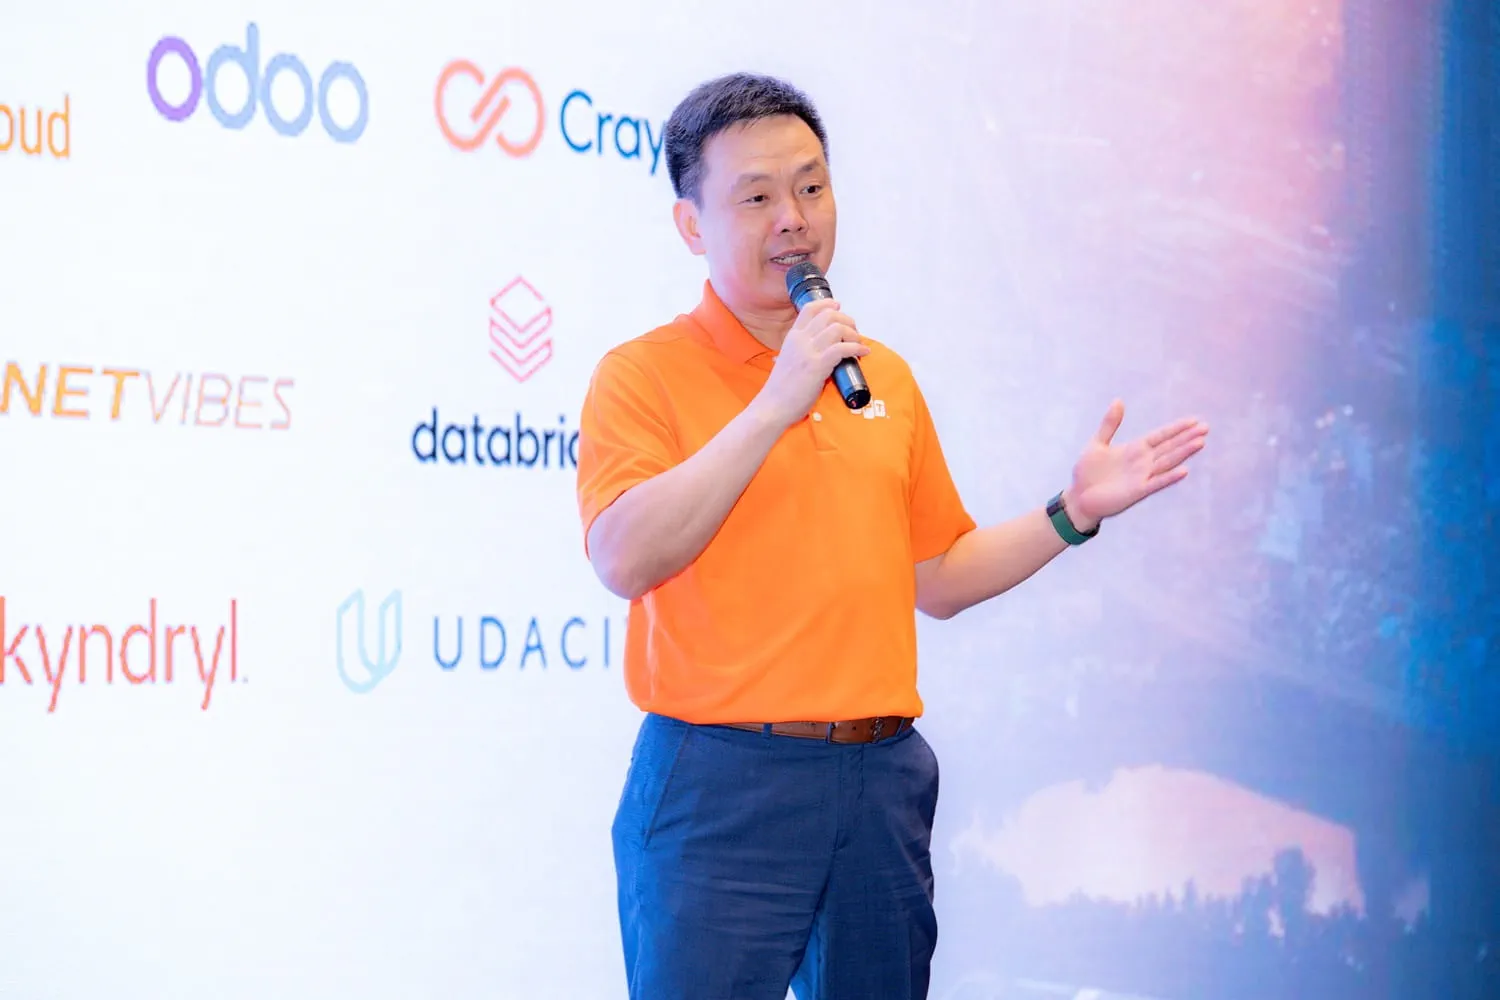 Mr. Pham Minh Tuan, CEO of FPT Software: "In its quest to achieve world-class status, FPT Software stands prepared to stand alongside its customers and partners in large-scale "big deals" globally reaching into the hundreds of millions of dollars.